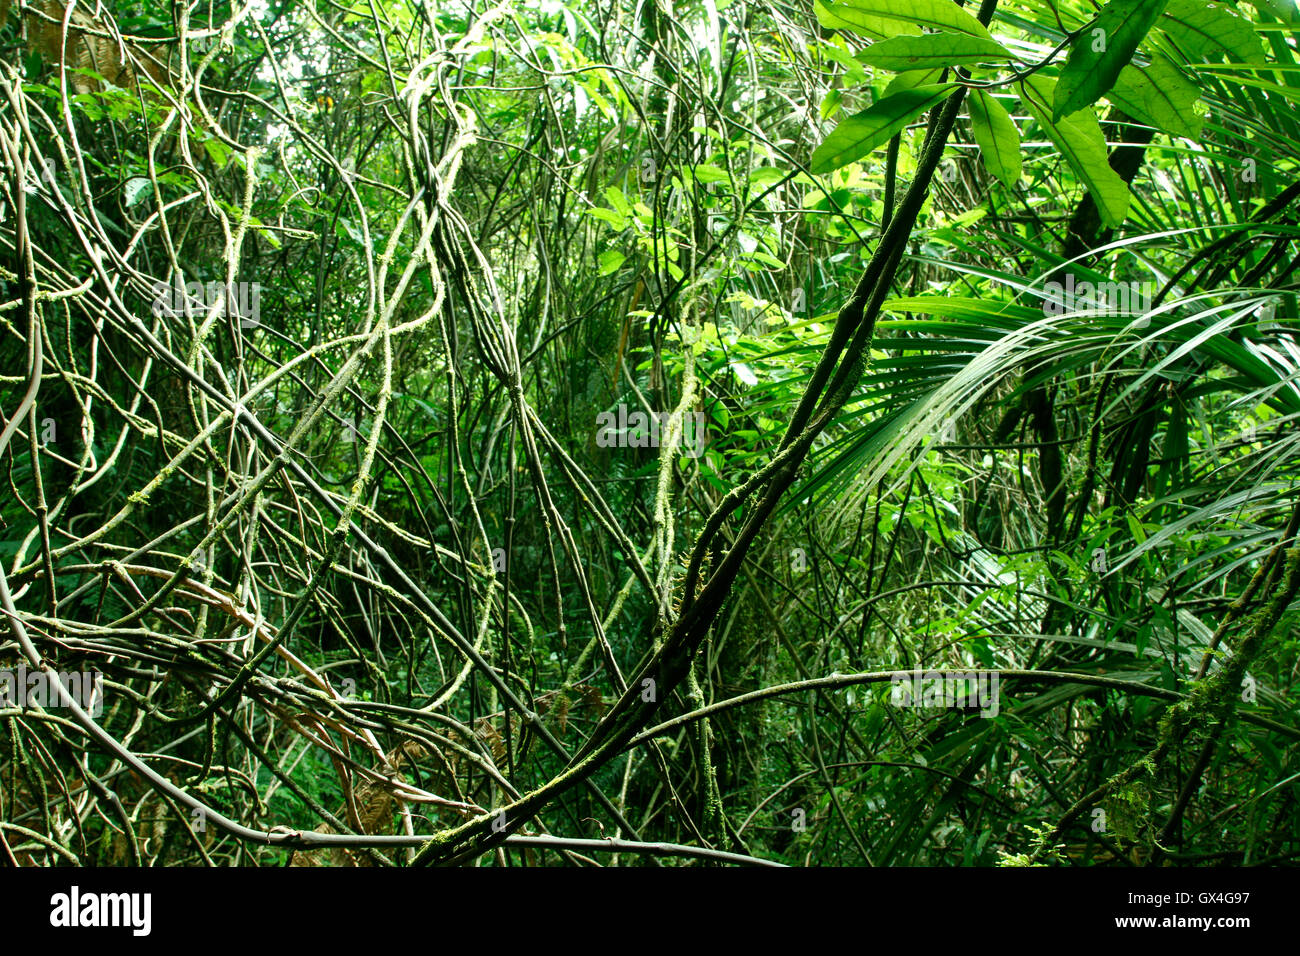 Vines and leaves in tropical jungle Stock Photo